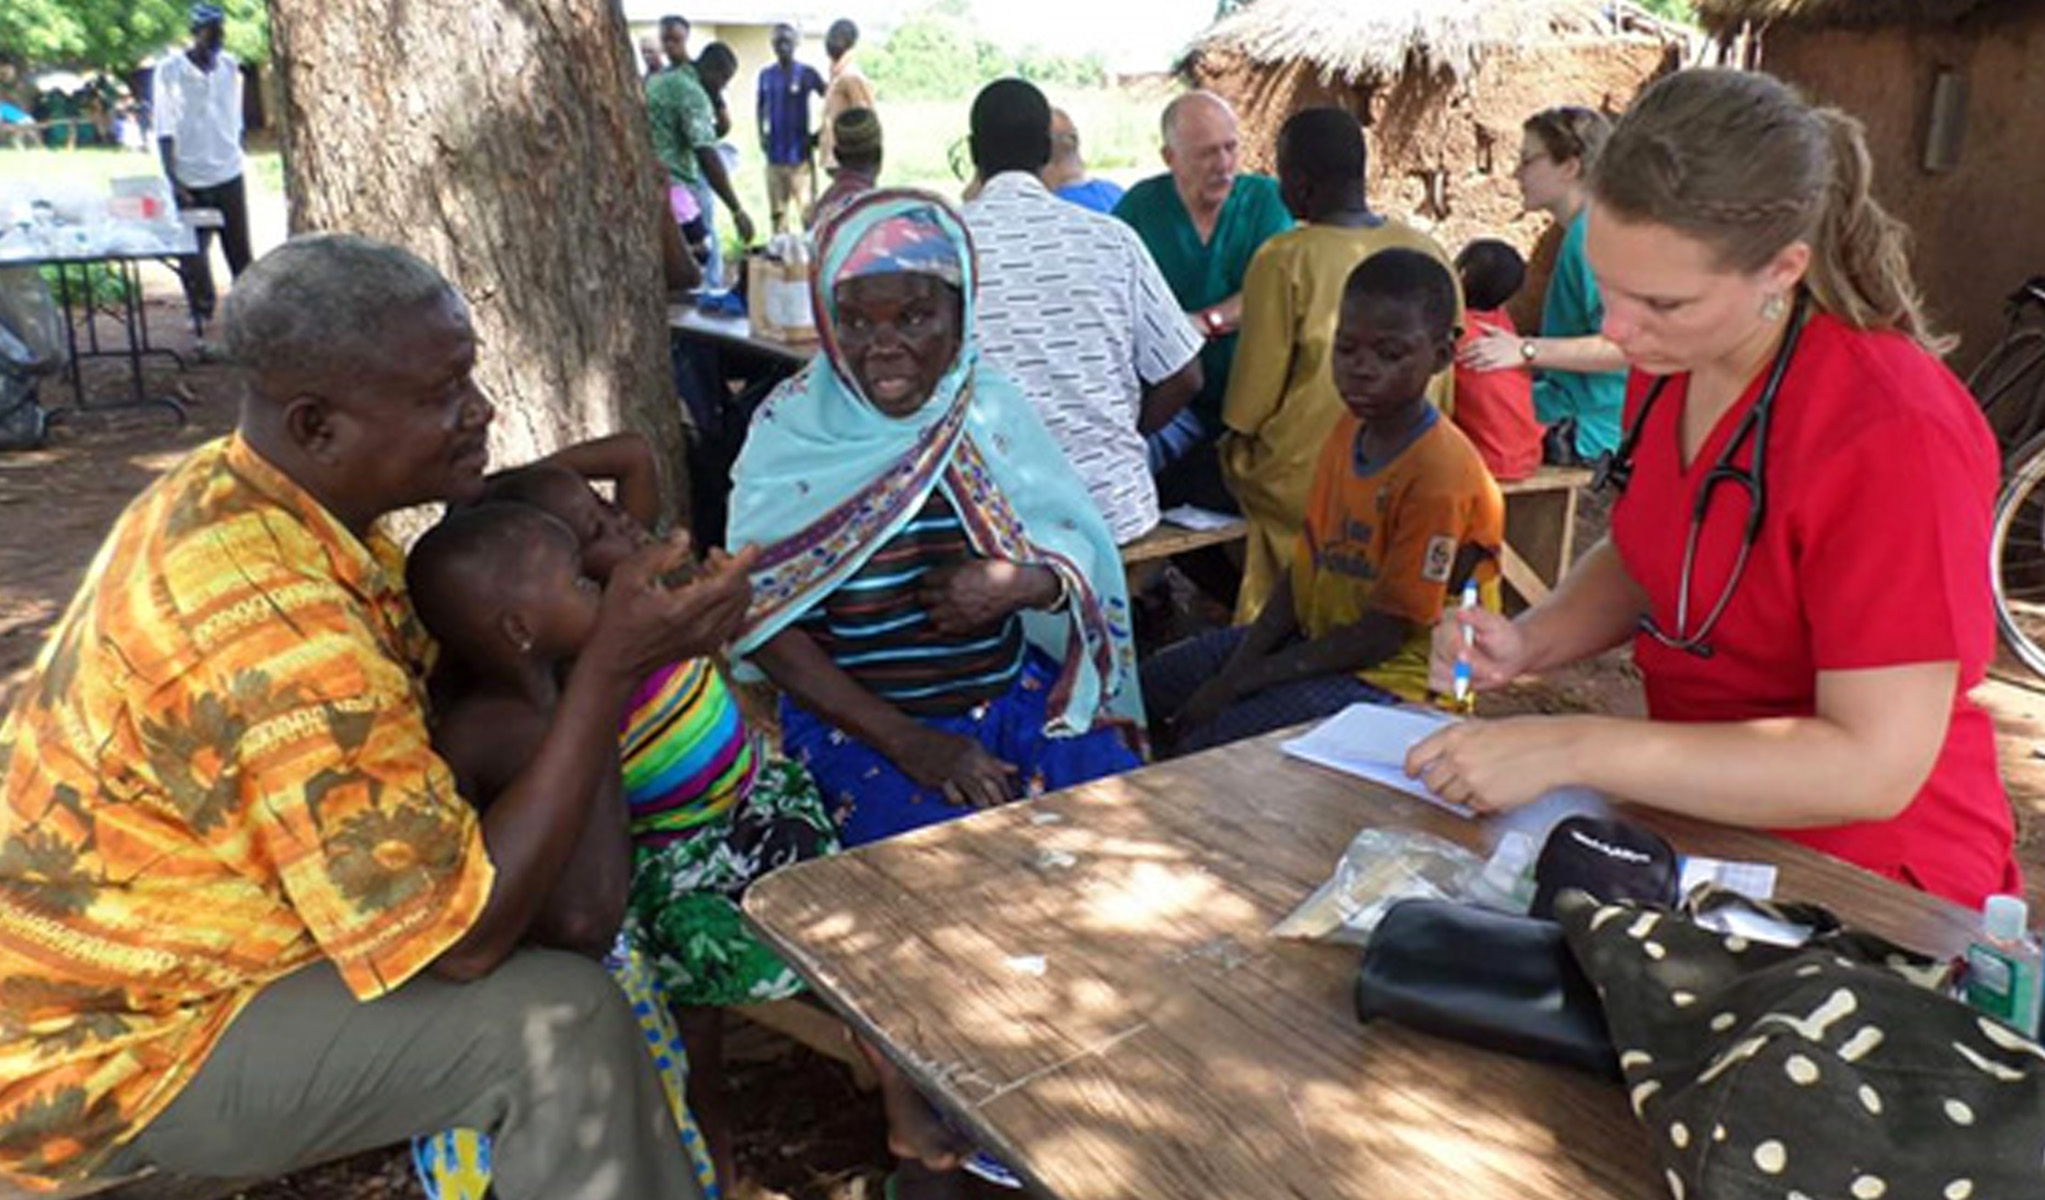 Former intern Staci Pessetti works with patients at a clinic in a remote village of northern Ghana.